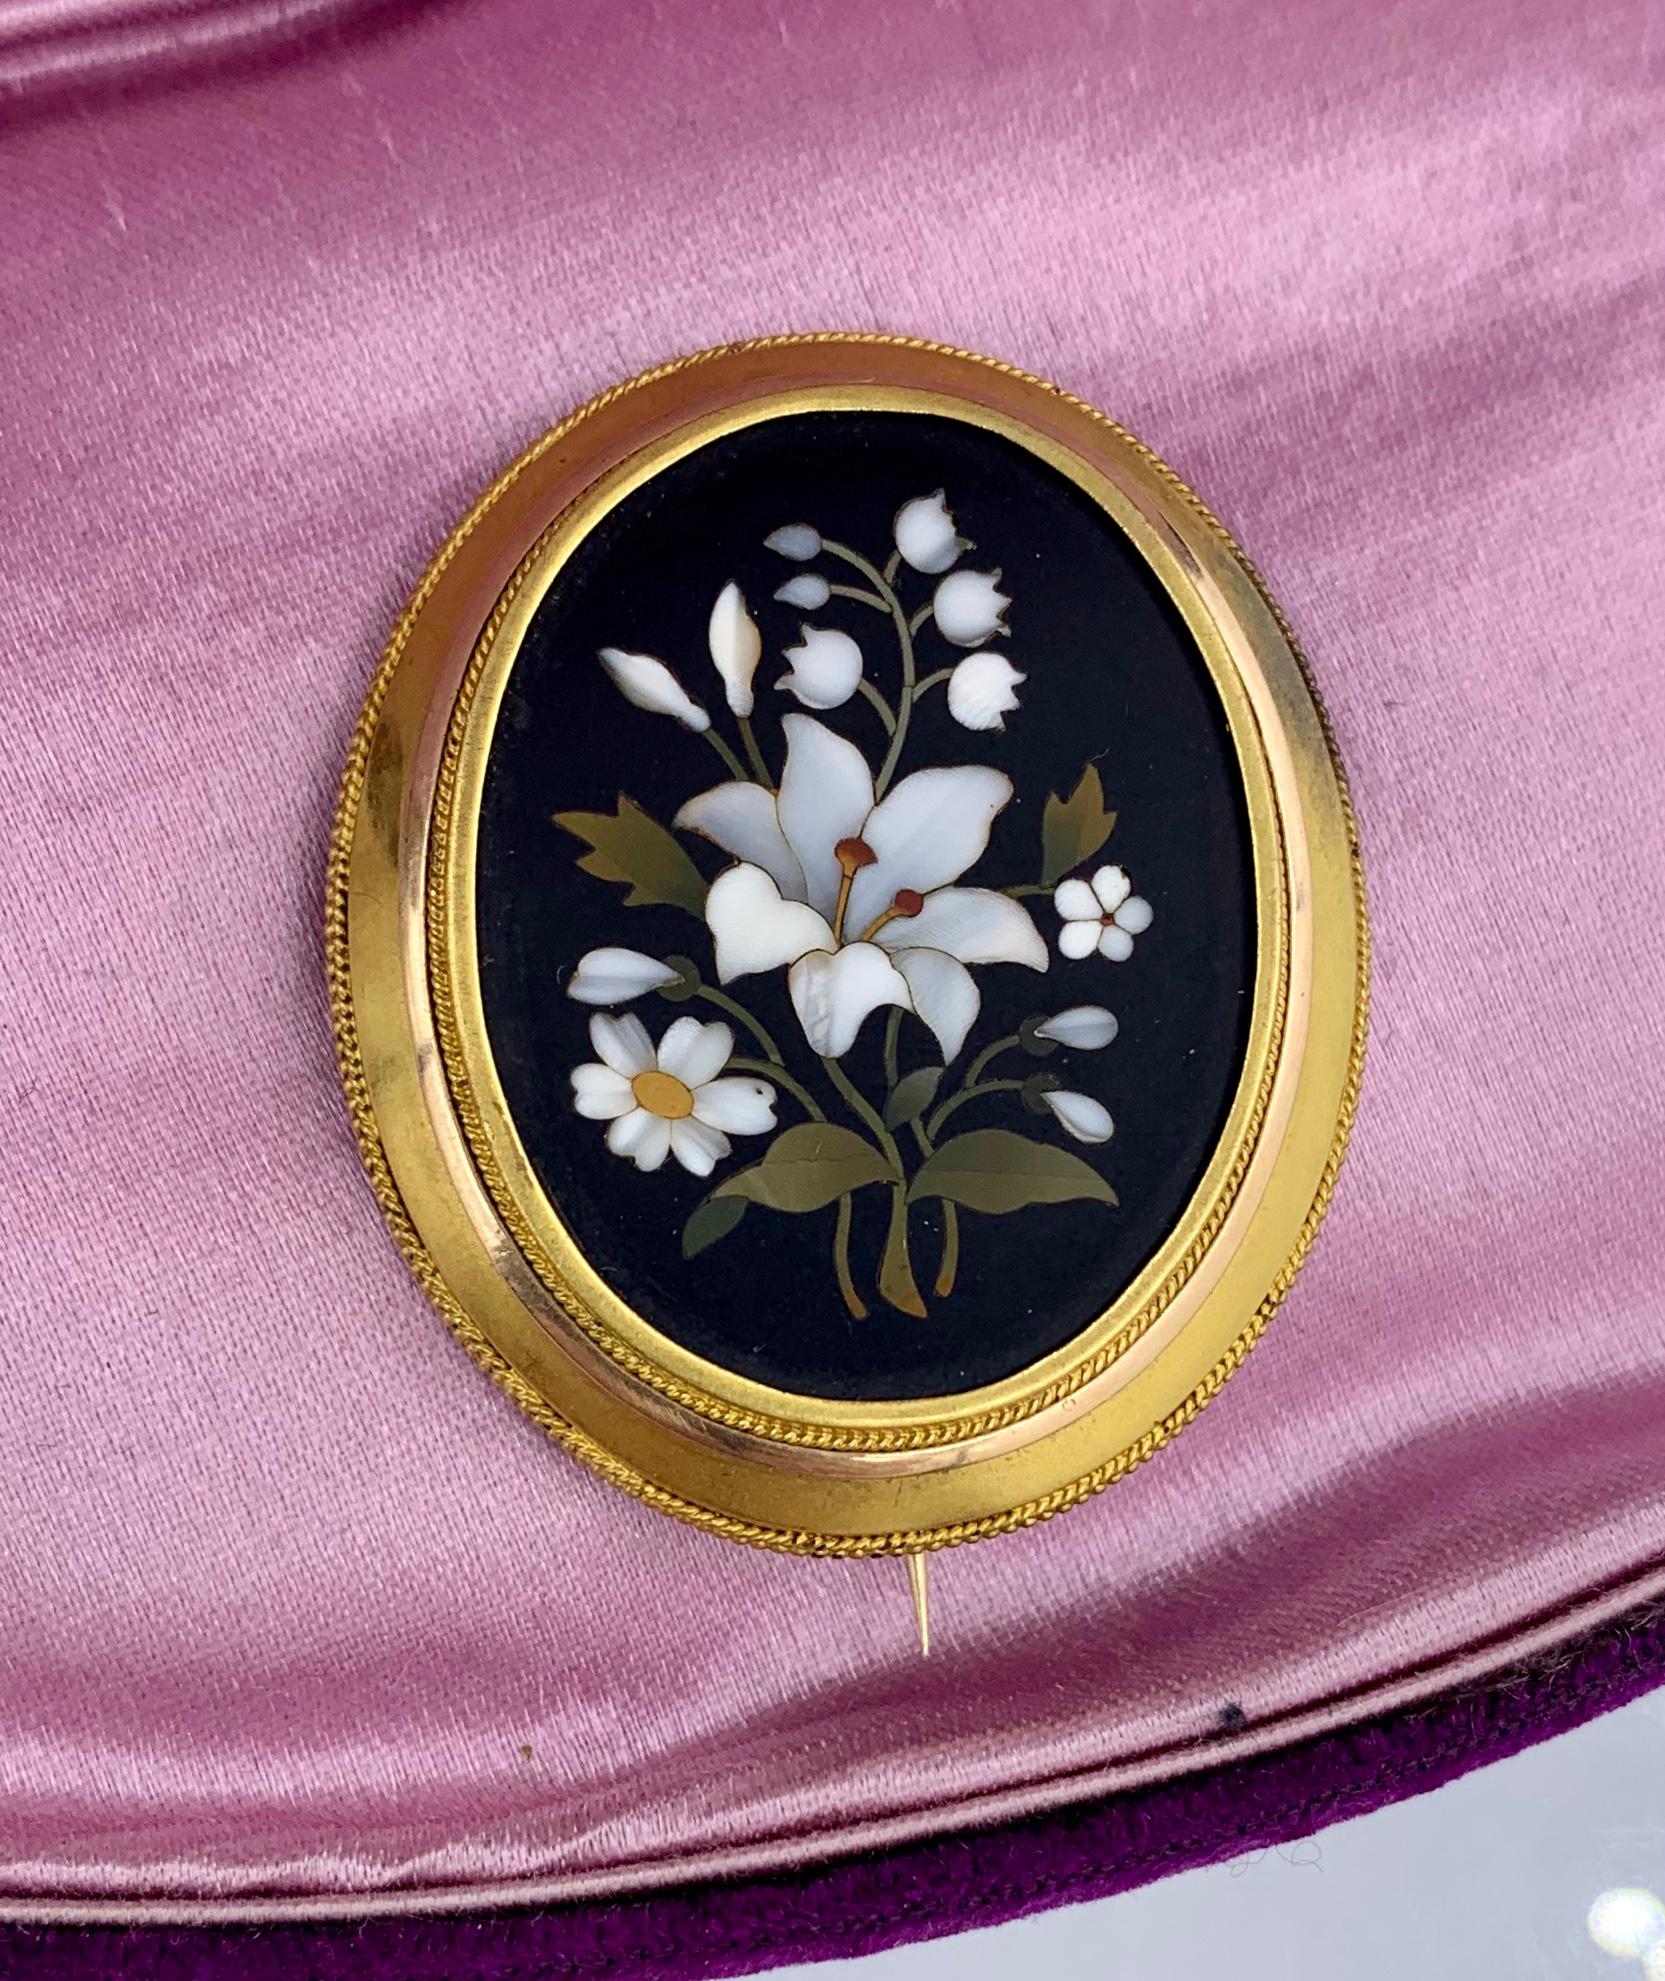 A stunning Pietra Dura Brooch in 14 Karat Gold with inlaid semi-precious stones creating a mosaic image of flowers including a gorgeous central white lily, lily of the valley, daisy and forget-me-not flowers.  The brooch is a masterpiece of Pietra